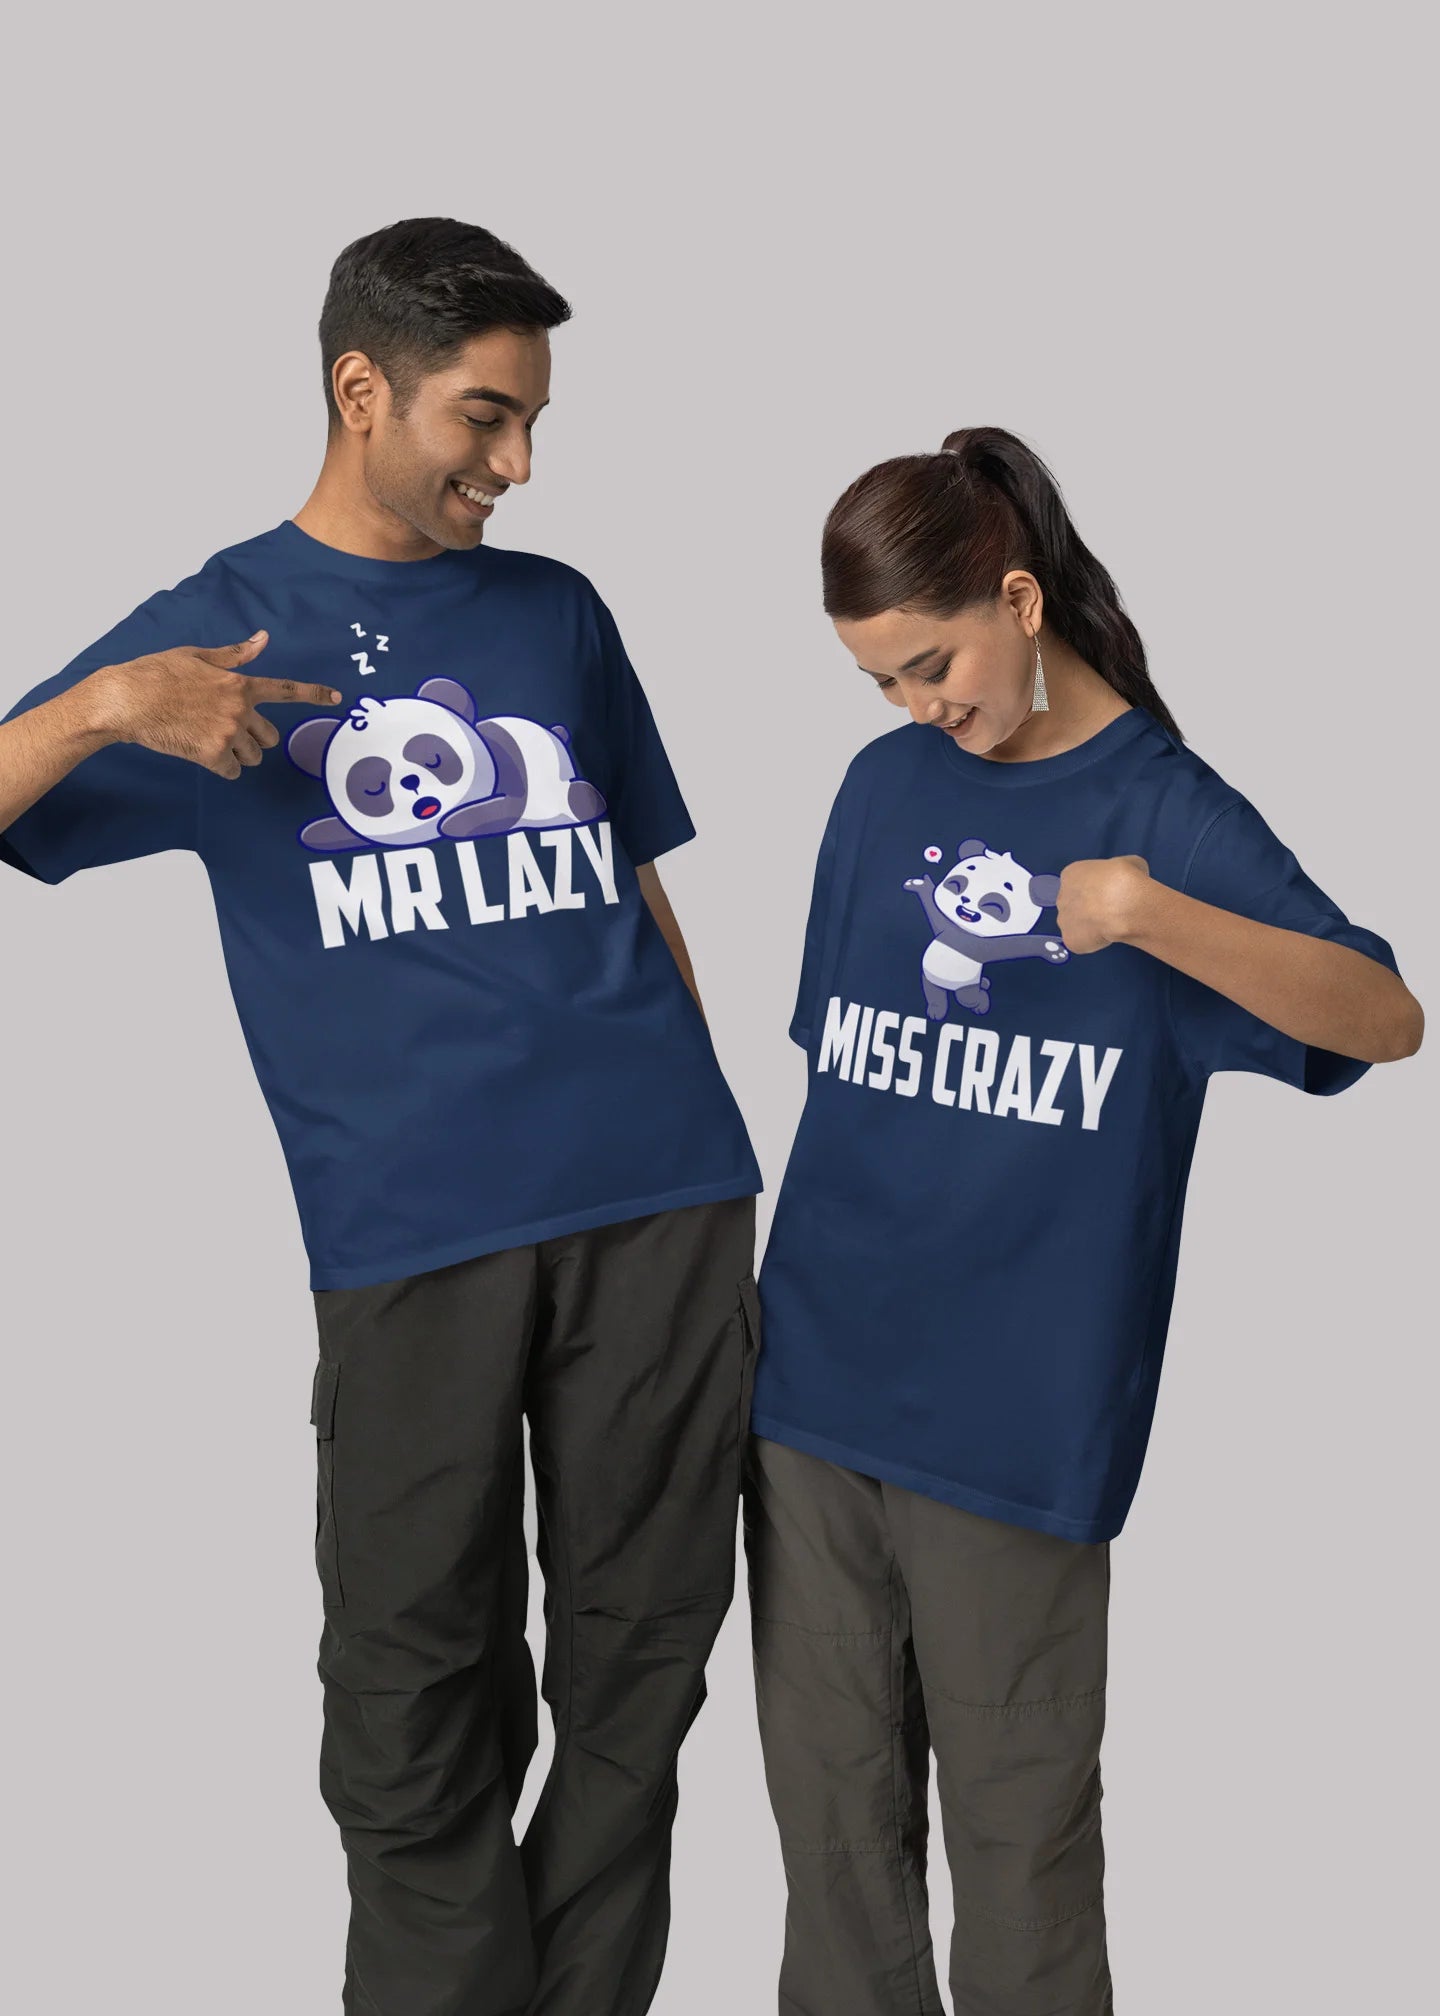 Mr Lazy And Miss Crazy Printed Couple T-shirt